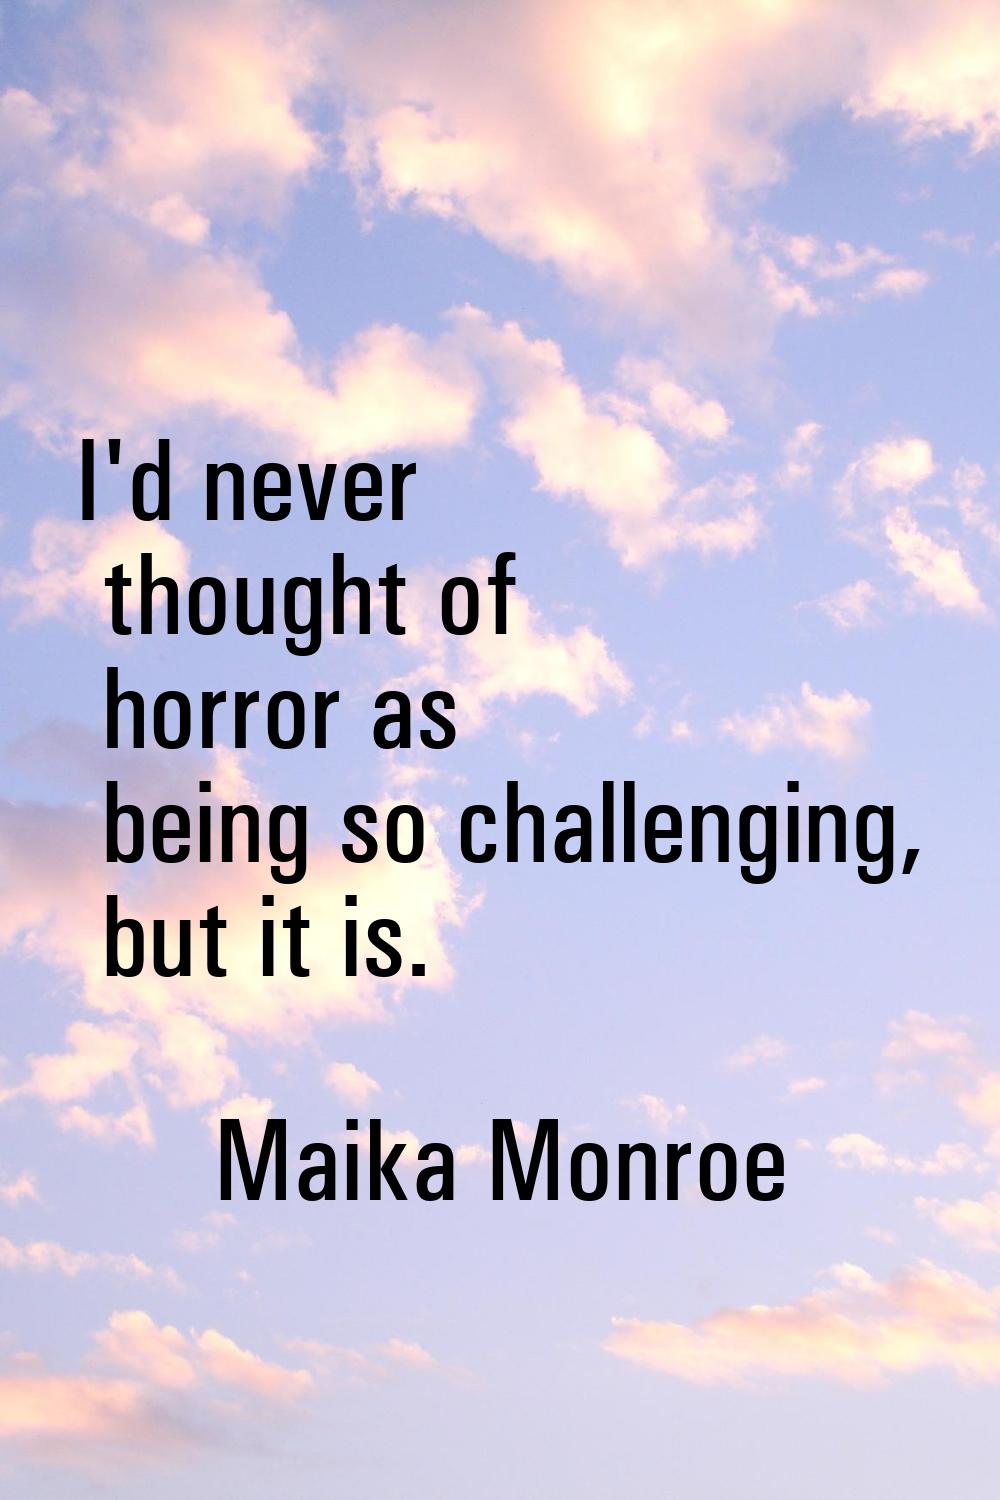 I'd never thought of horror as being so challenging, but it is.